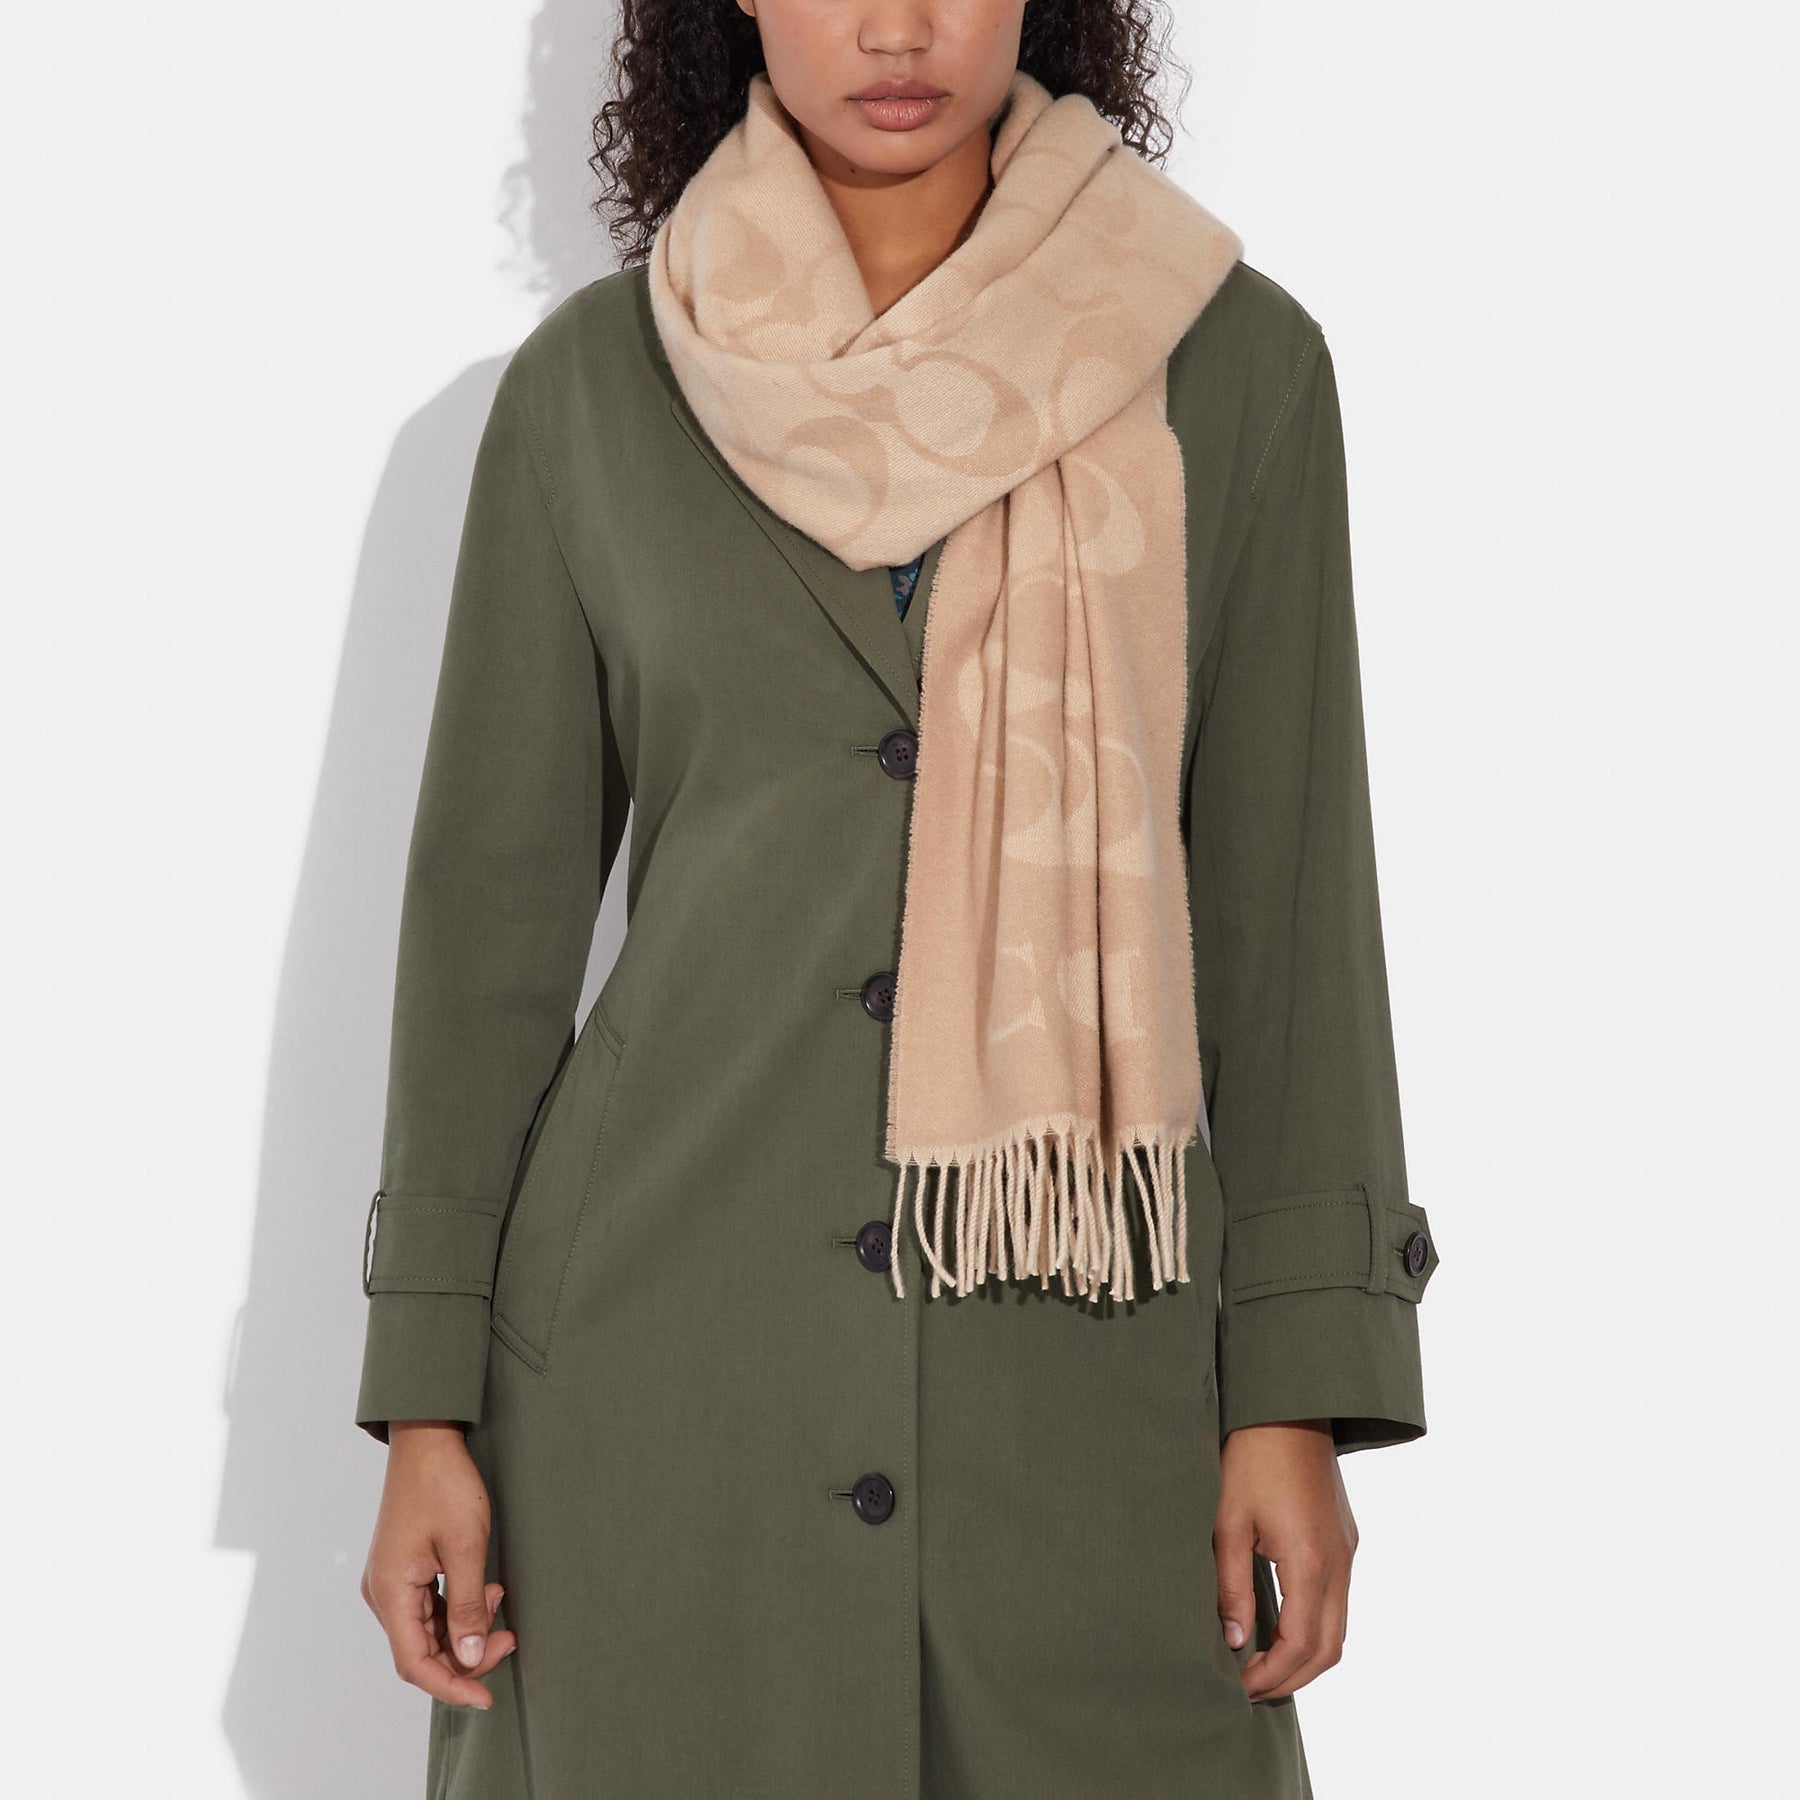 Cute signature oversized muffler from Coach, perfect for a pop of